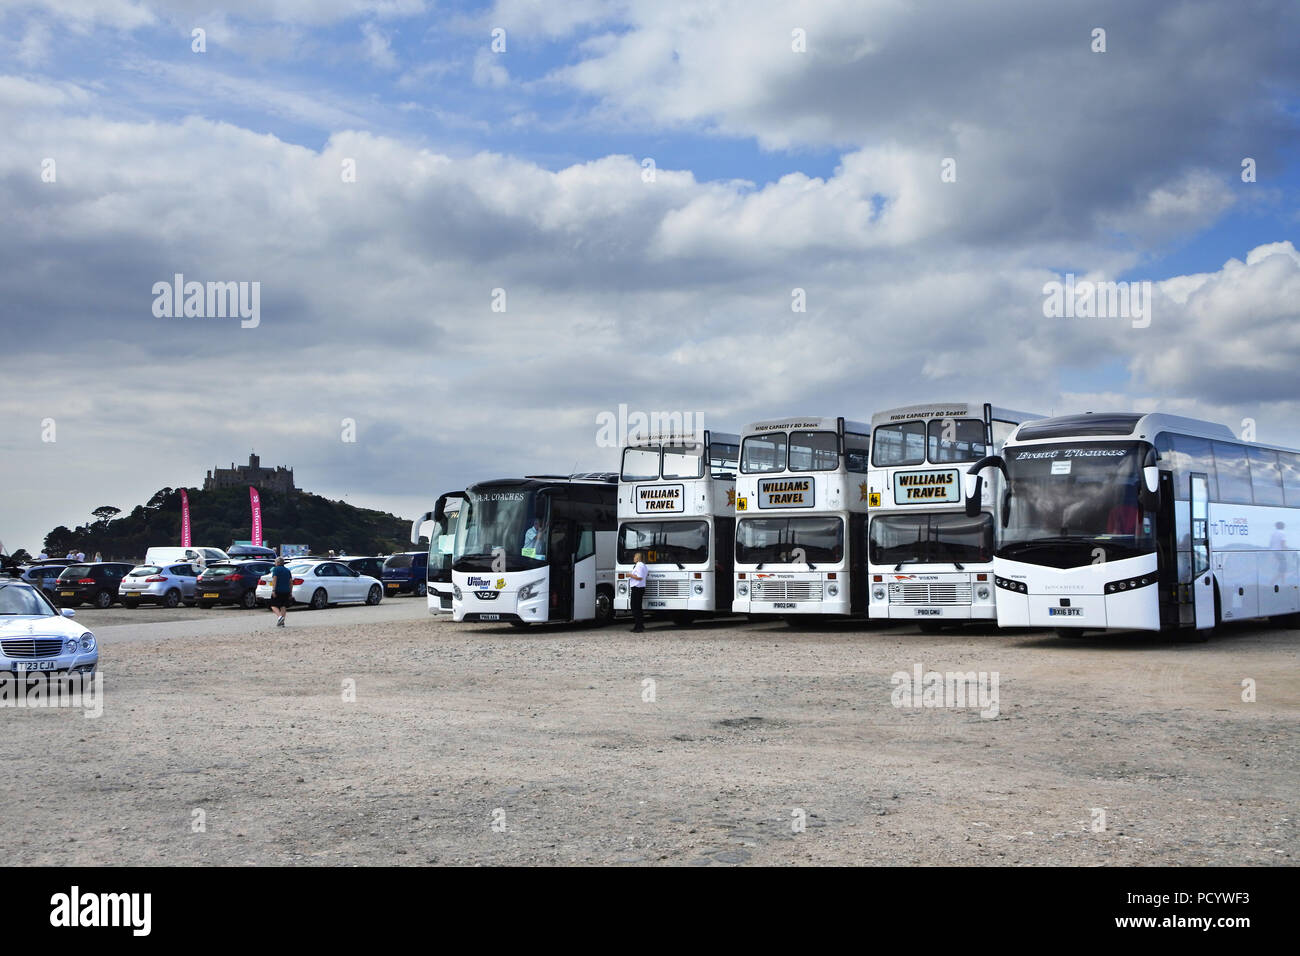 Tourist Coaches High Resolution Stock Photography and Images - Alamy